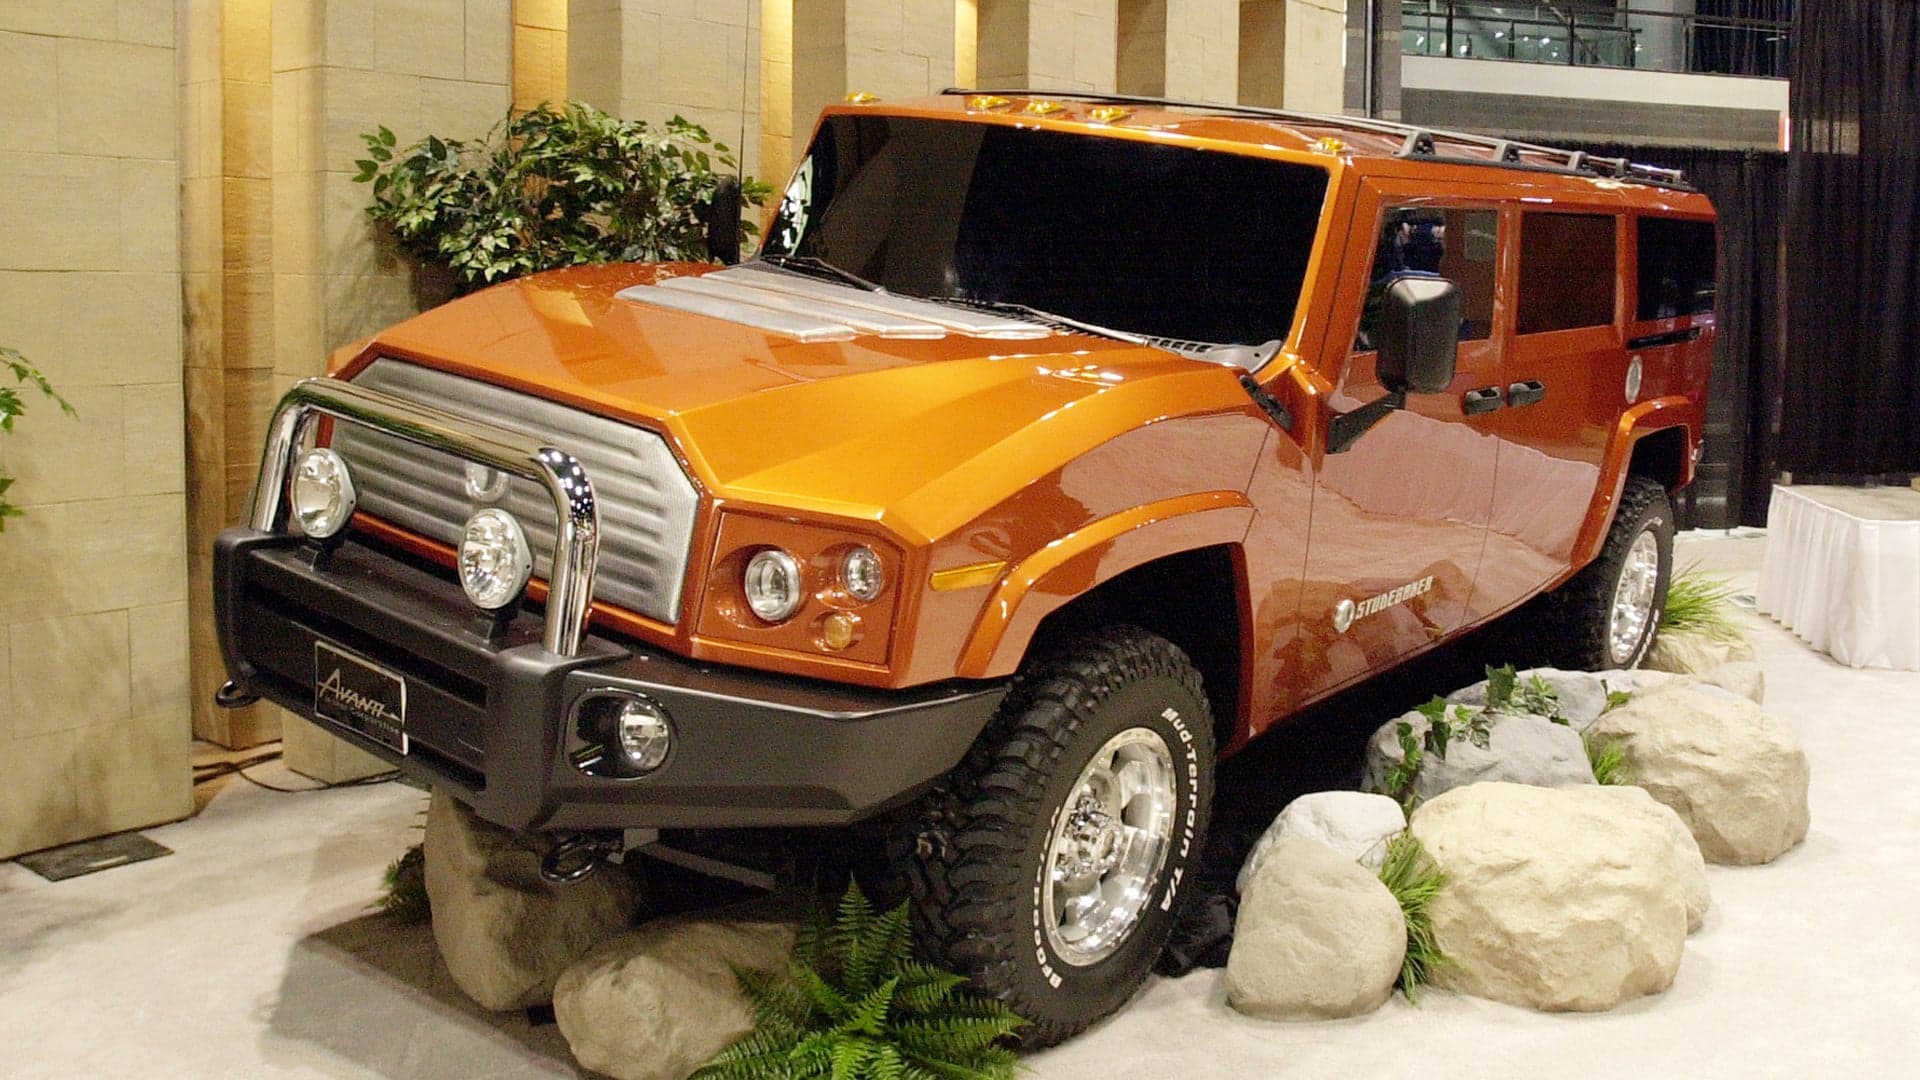 The 2003 Studebaker XUV Attempted to Revive a Classic Name with an Illegal Hummer Clone